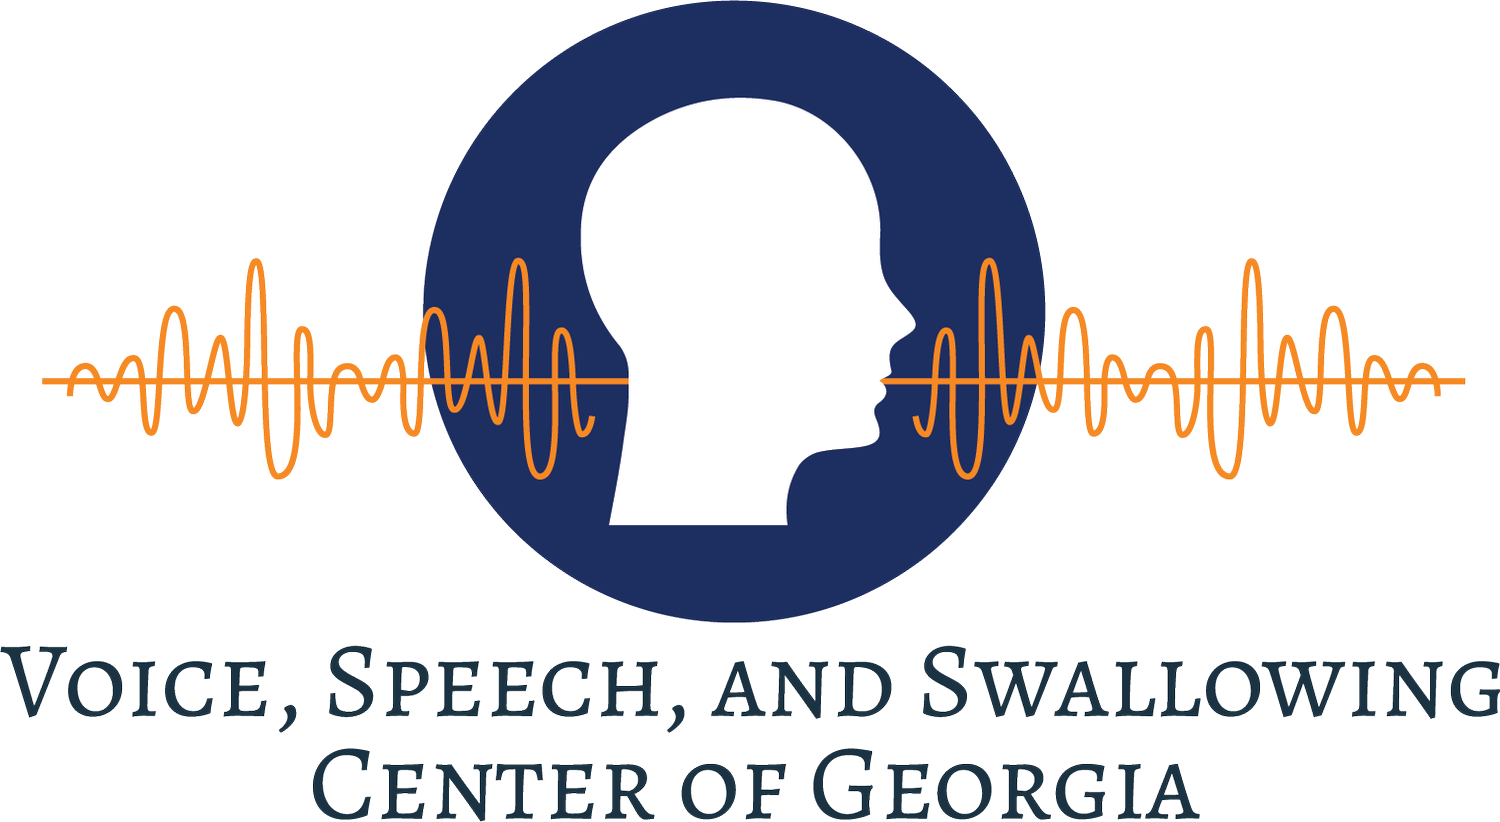 Voice, Speech and Swallowing Center of Georgia